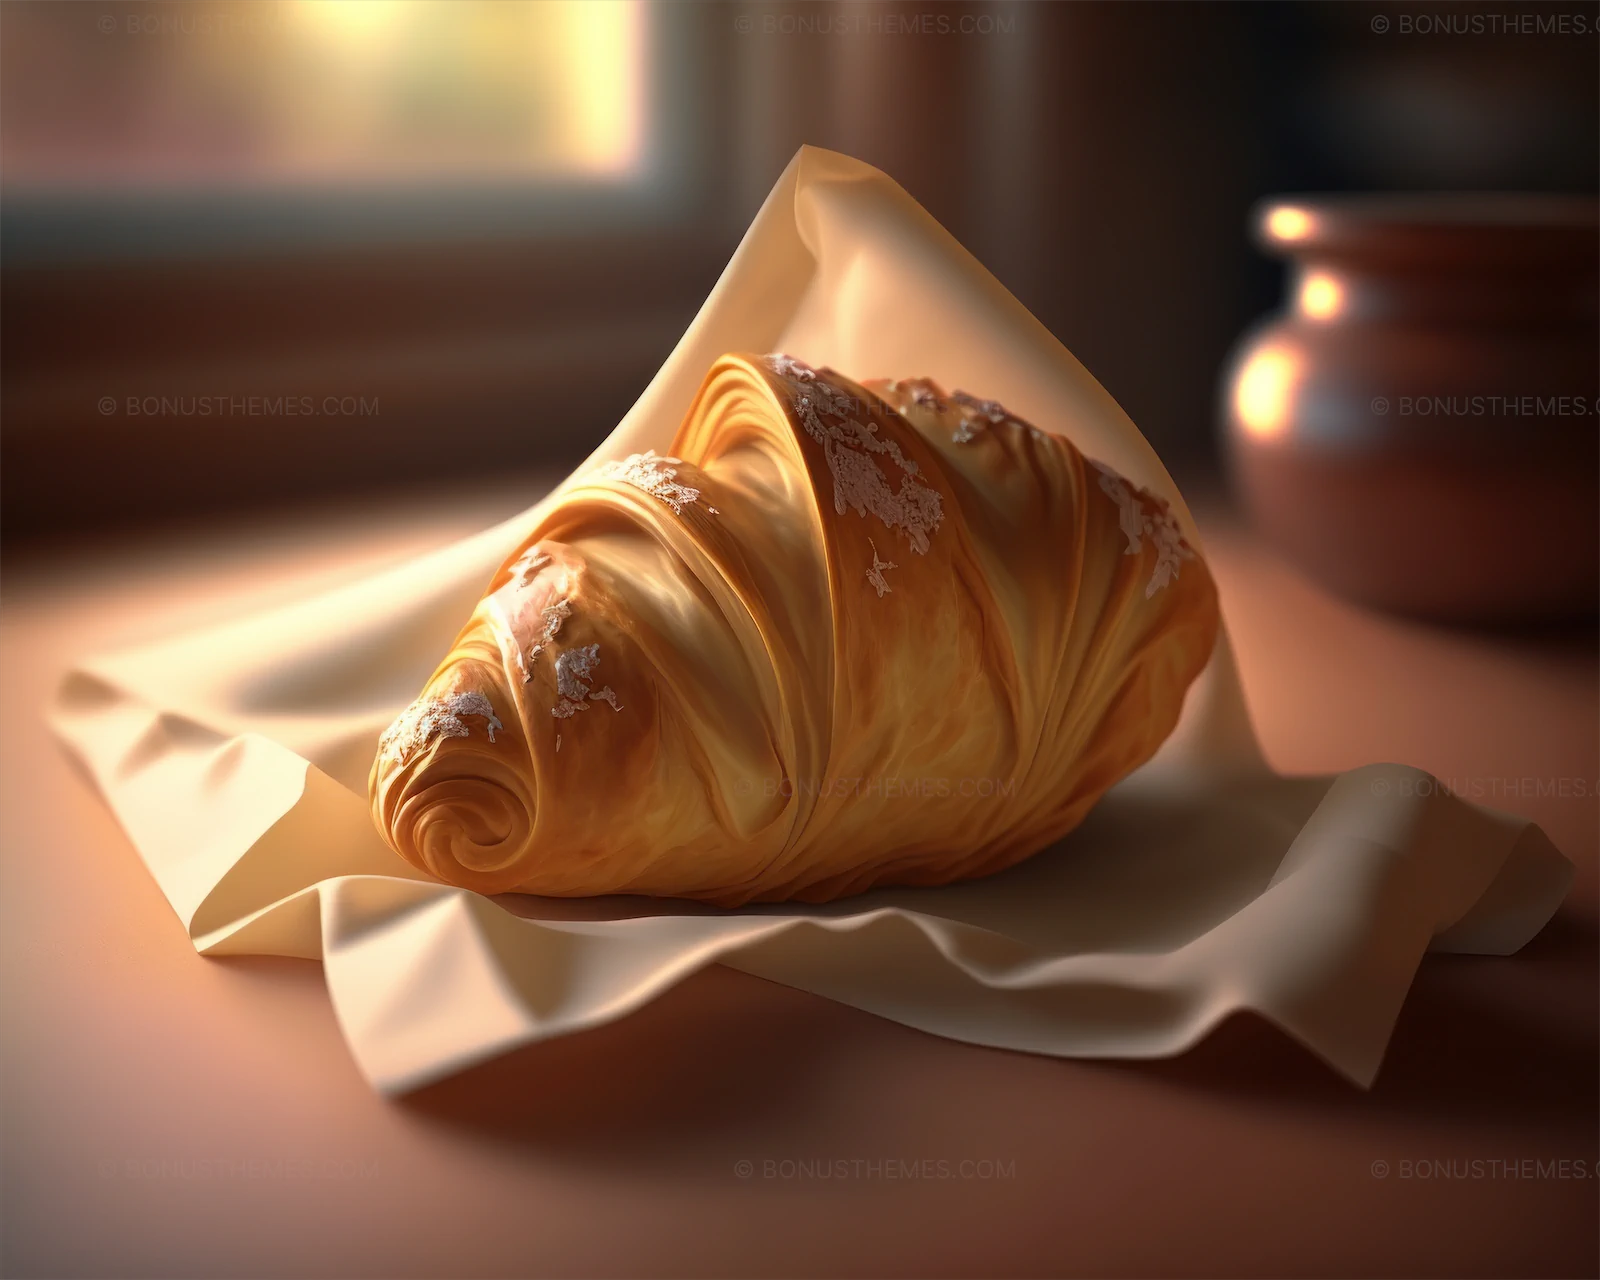 Creamy filled croissant on a napkin